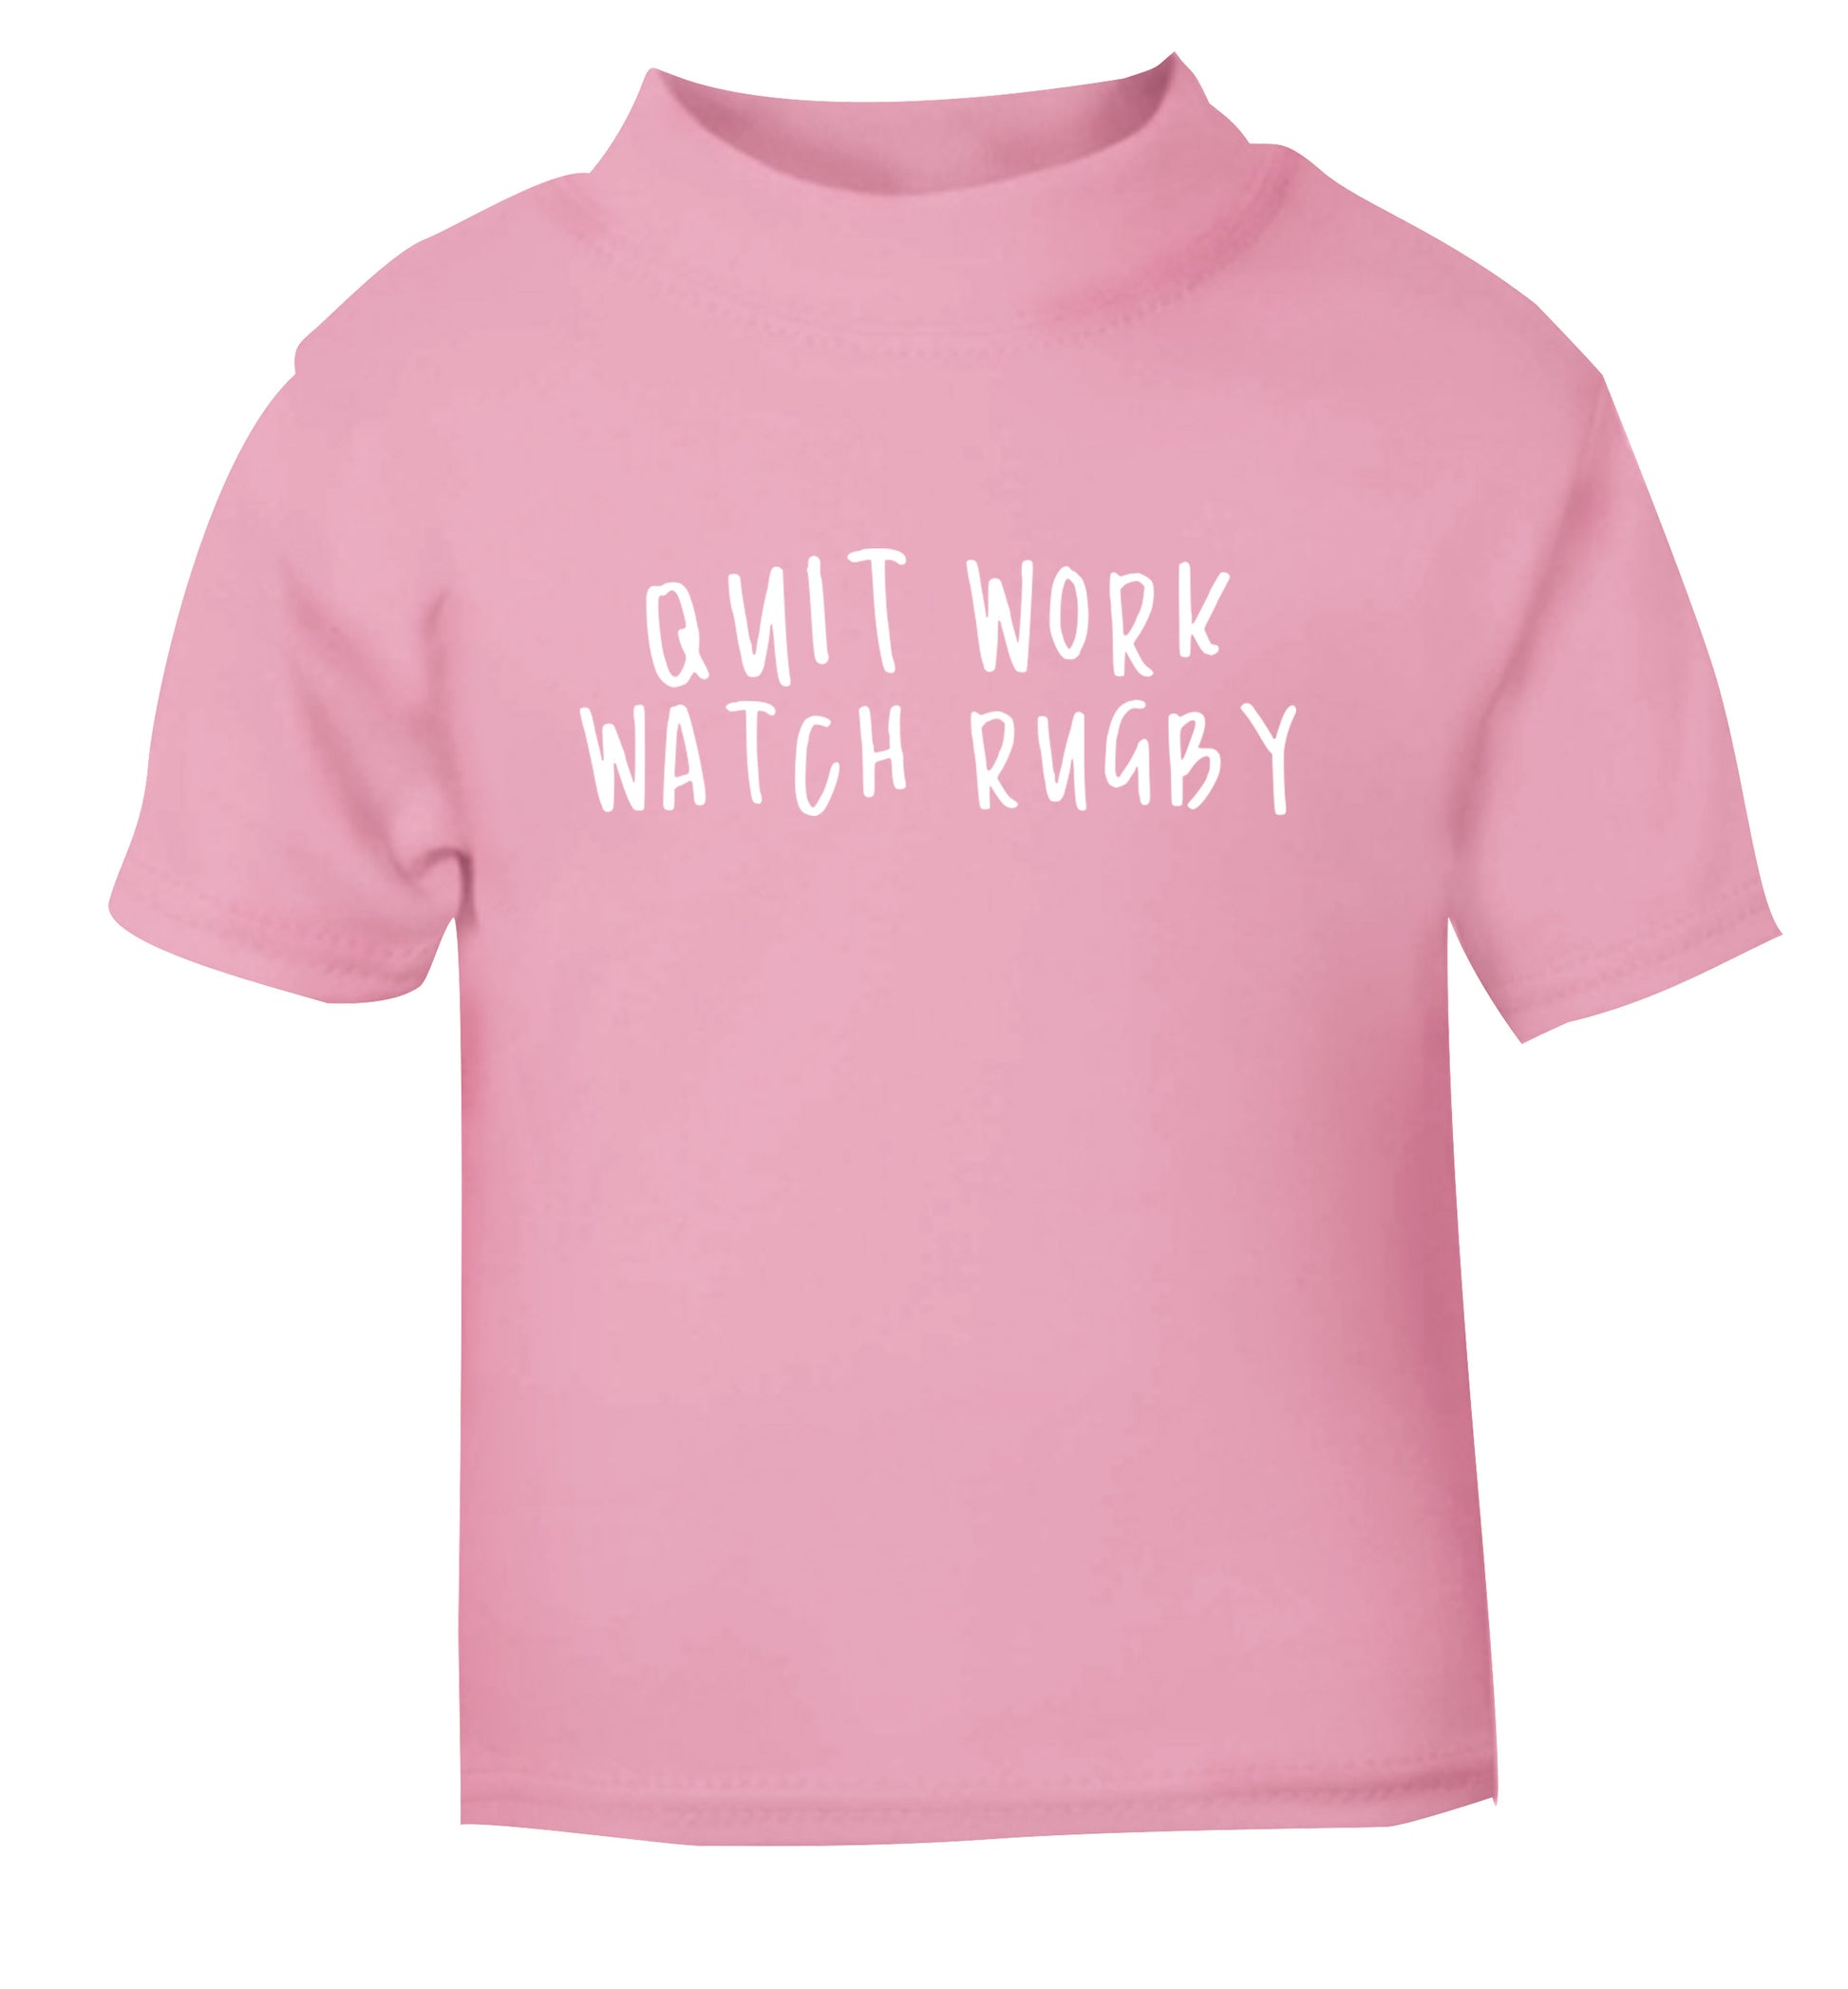 Quit work watch rugby light pink Baby Toddler Tshirt 2 Years